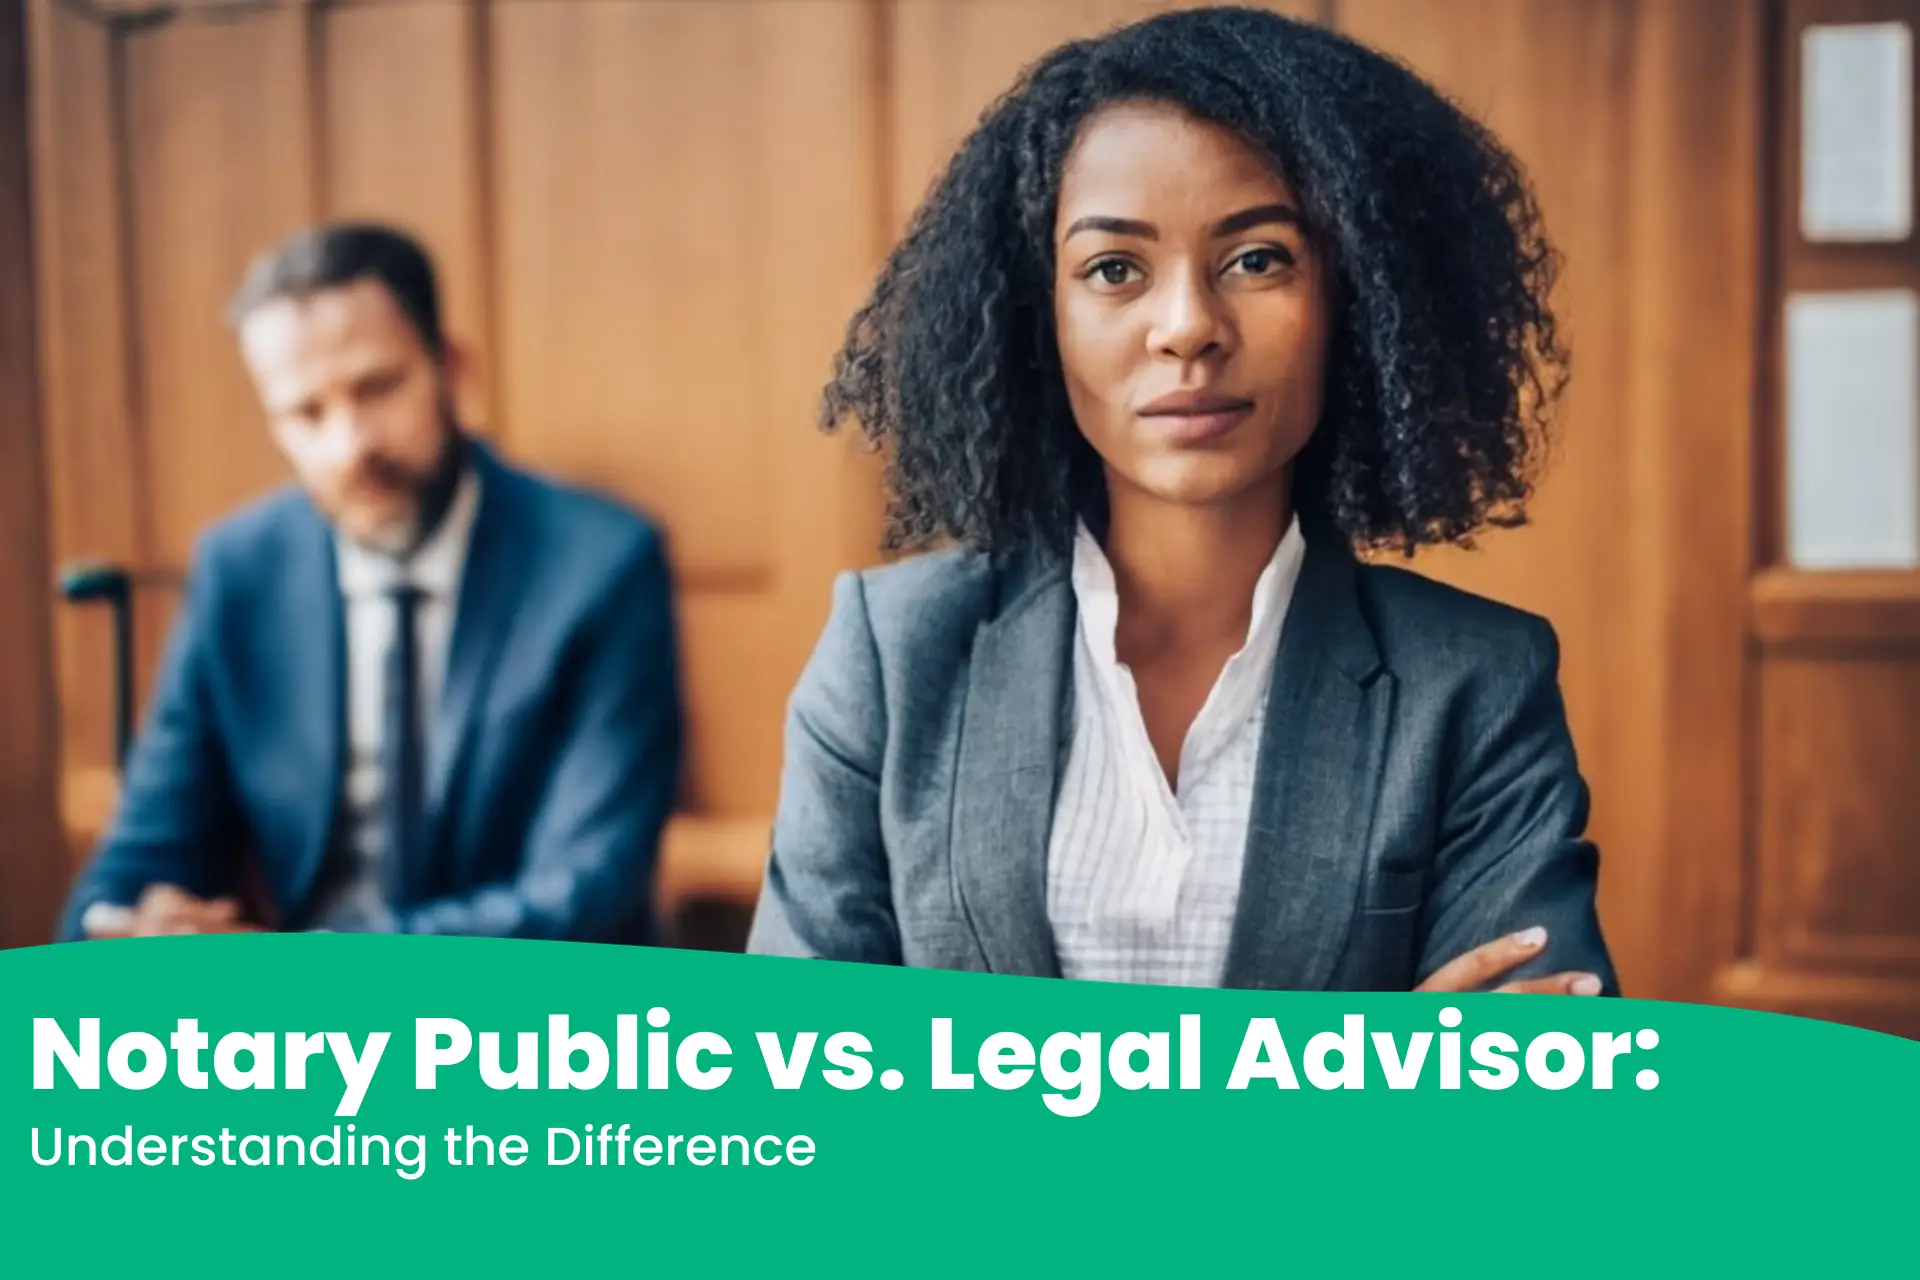 Professional woman and man discussing in a meeting with text "Notary Public vs. Legal Advisor: Understanding the Difference".